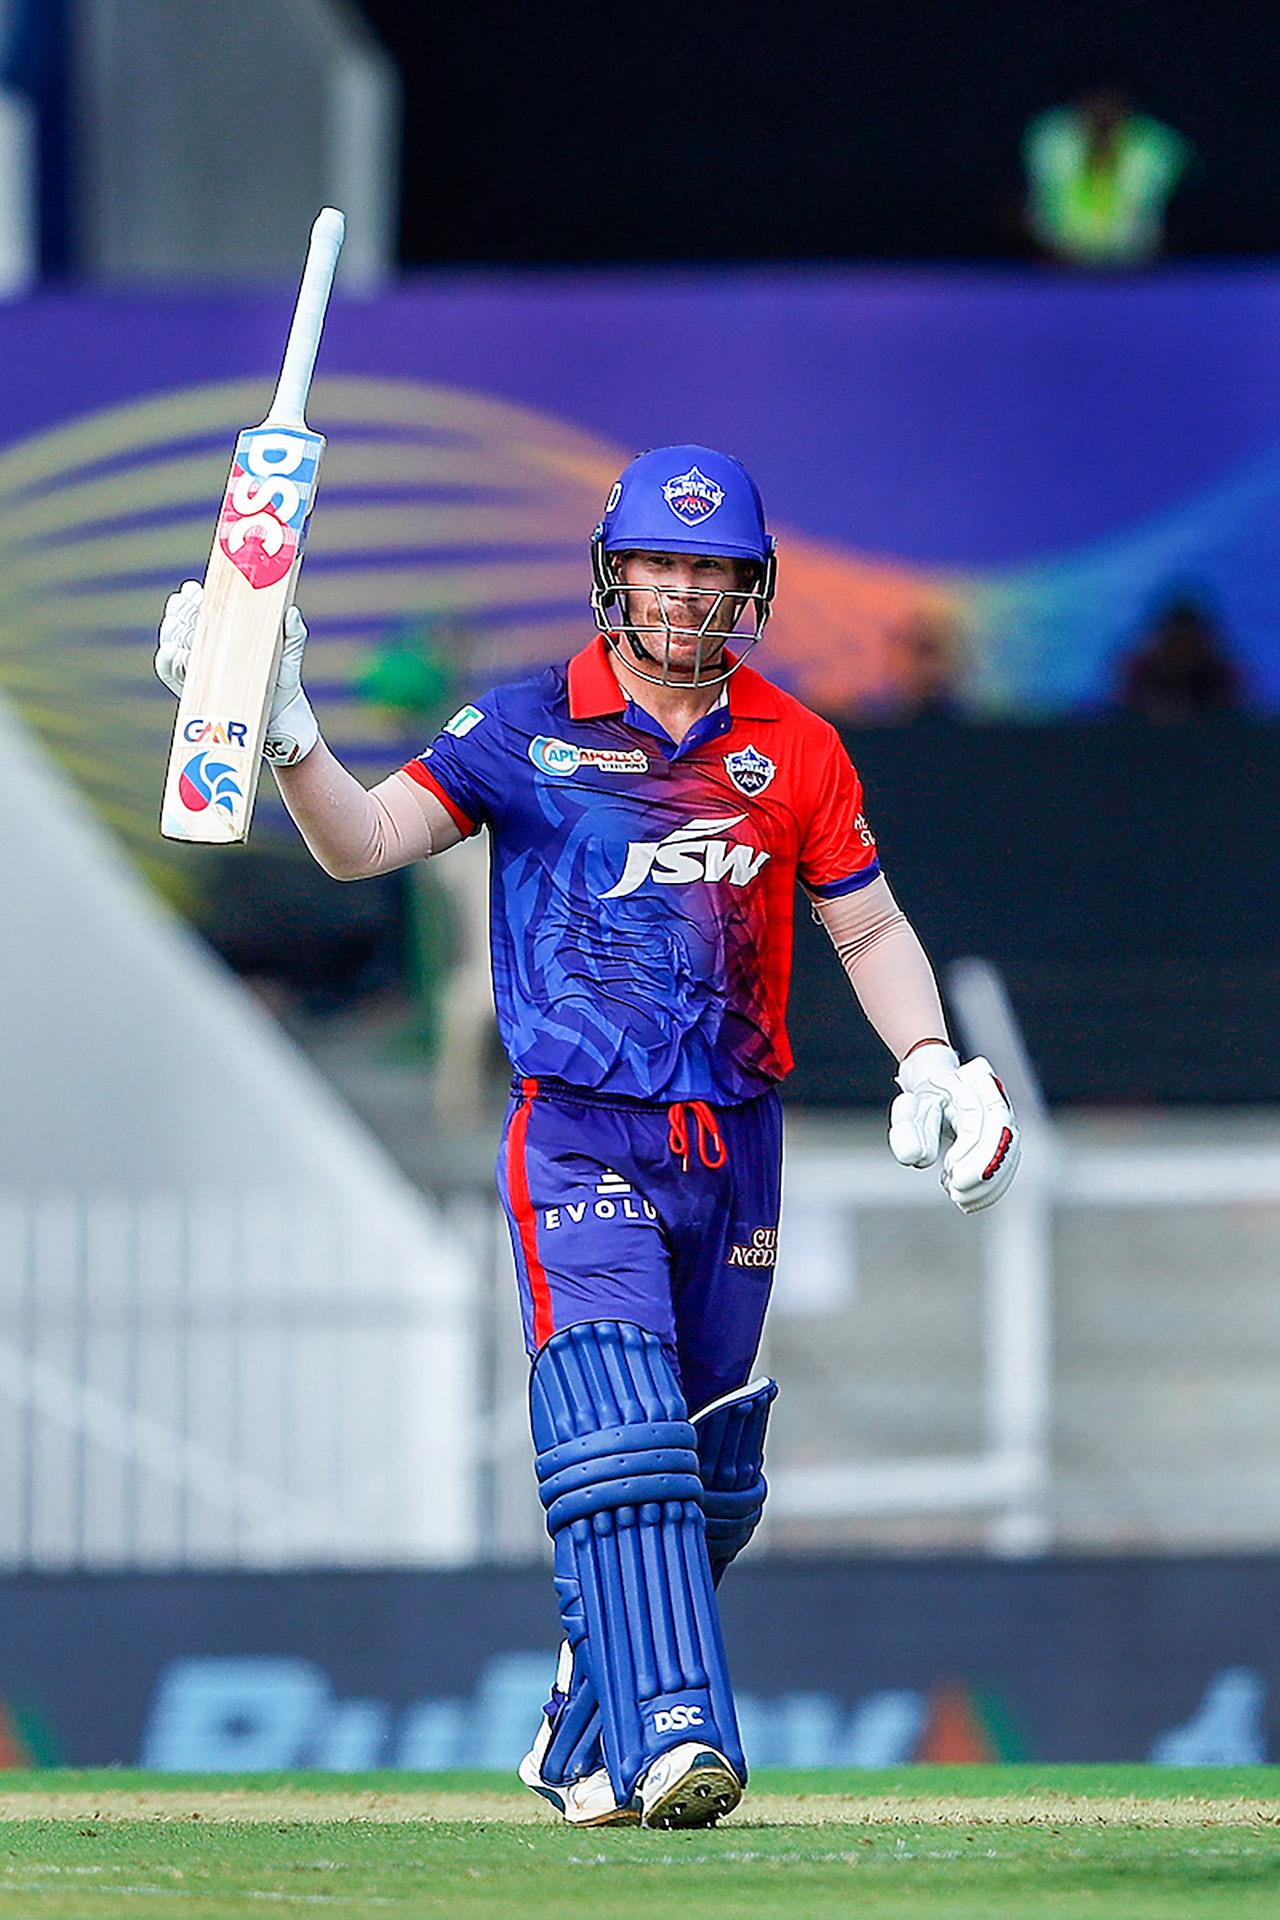 David Warner, who opened with Shaw, also posted a brilliant 61 runs off 45 balls including 6 boundaries and 2 sixes before he was dismissed by Umesh Yadav